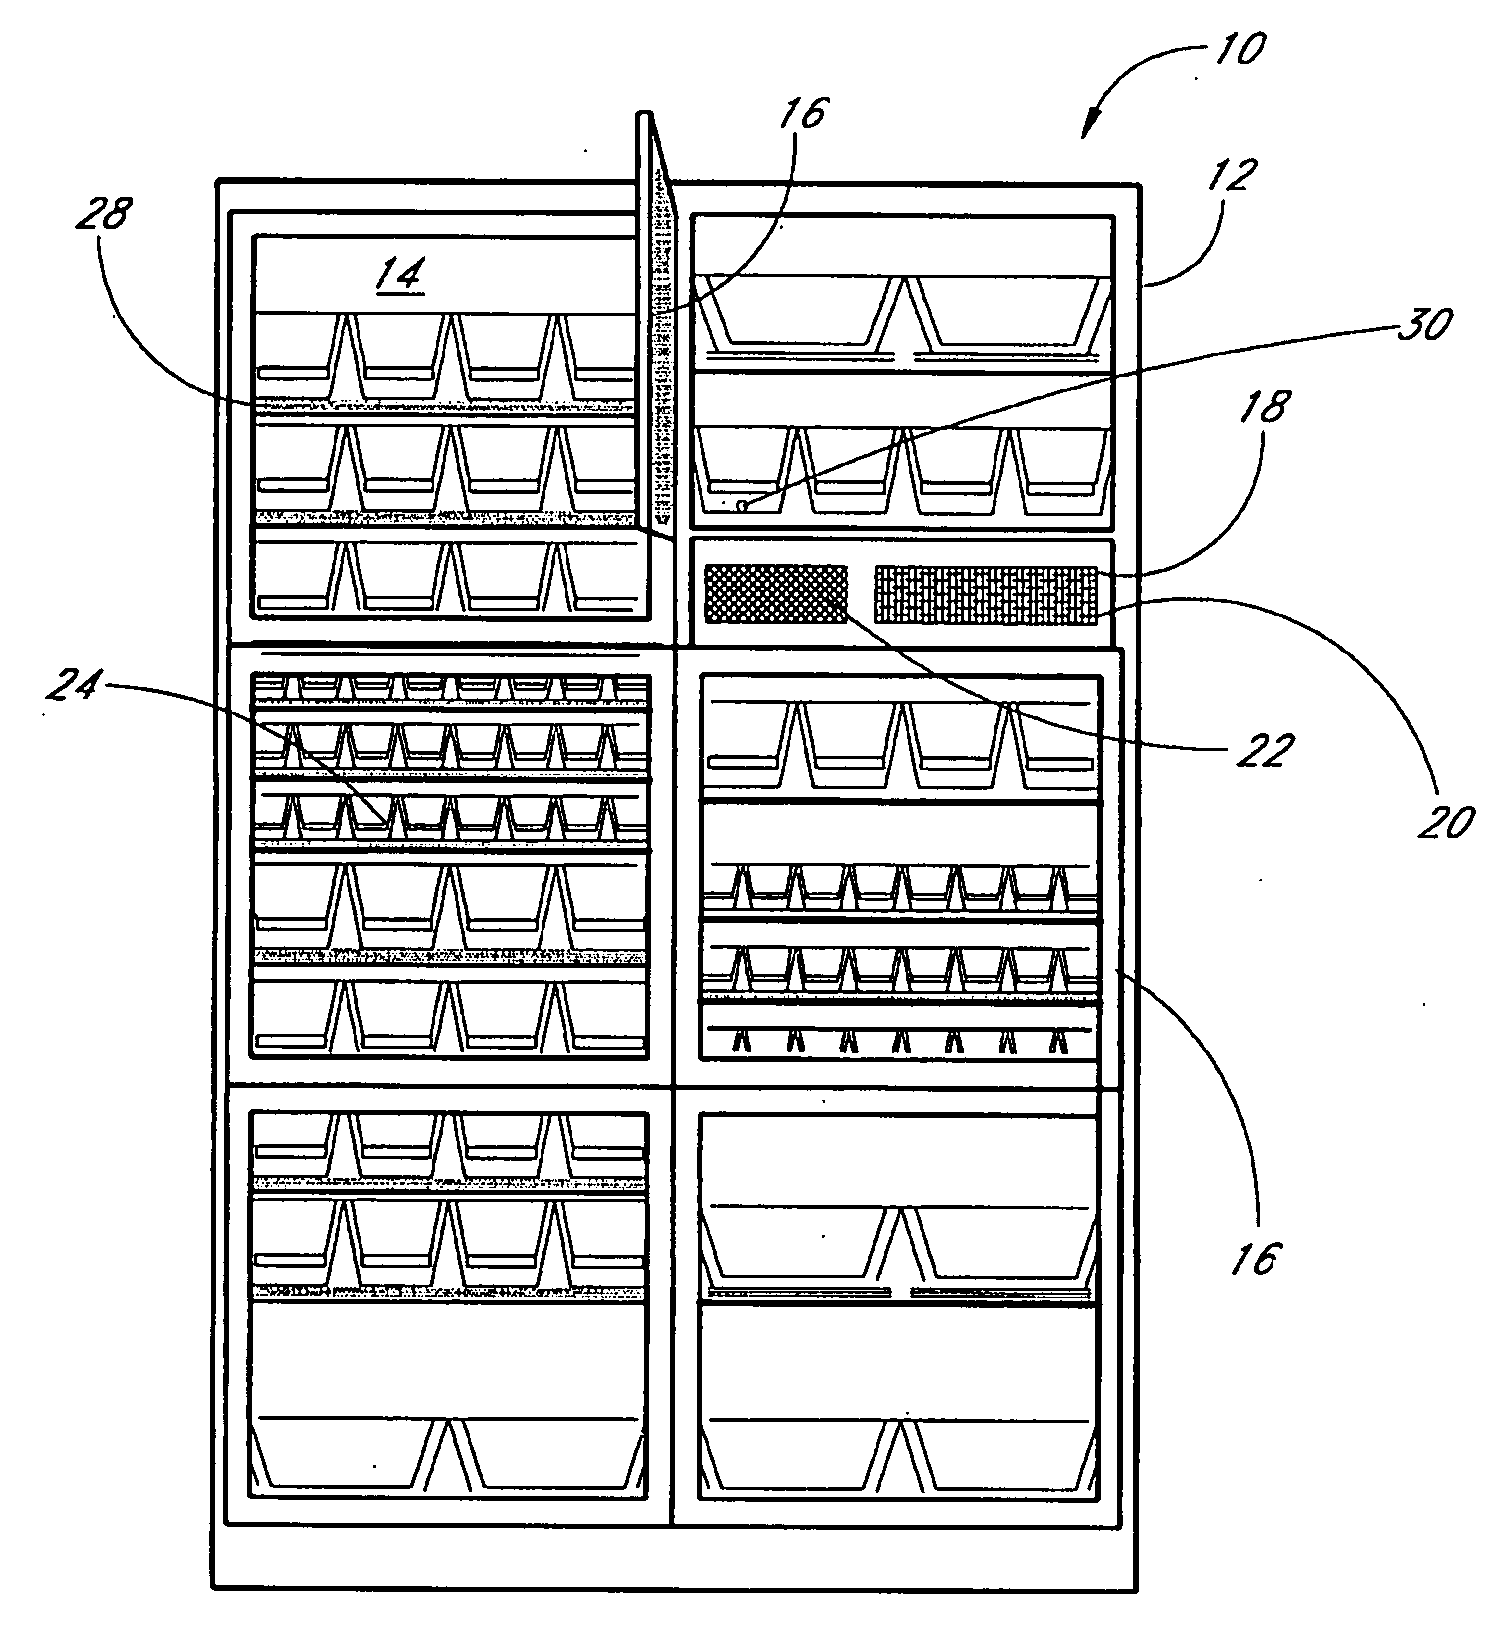 Controlled inventory device and method using pressure transducer